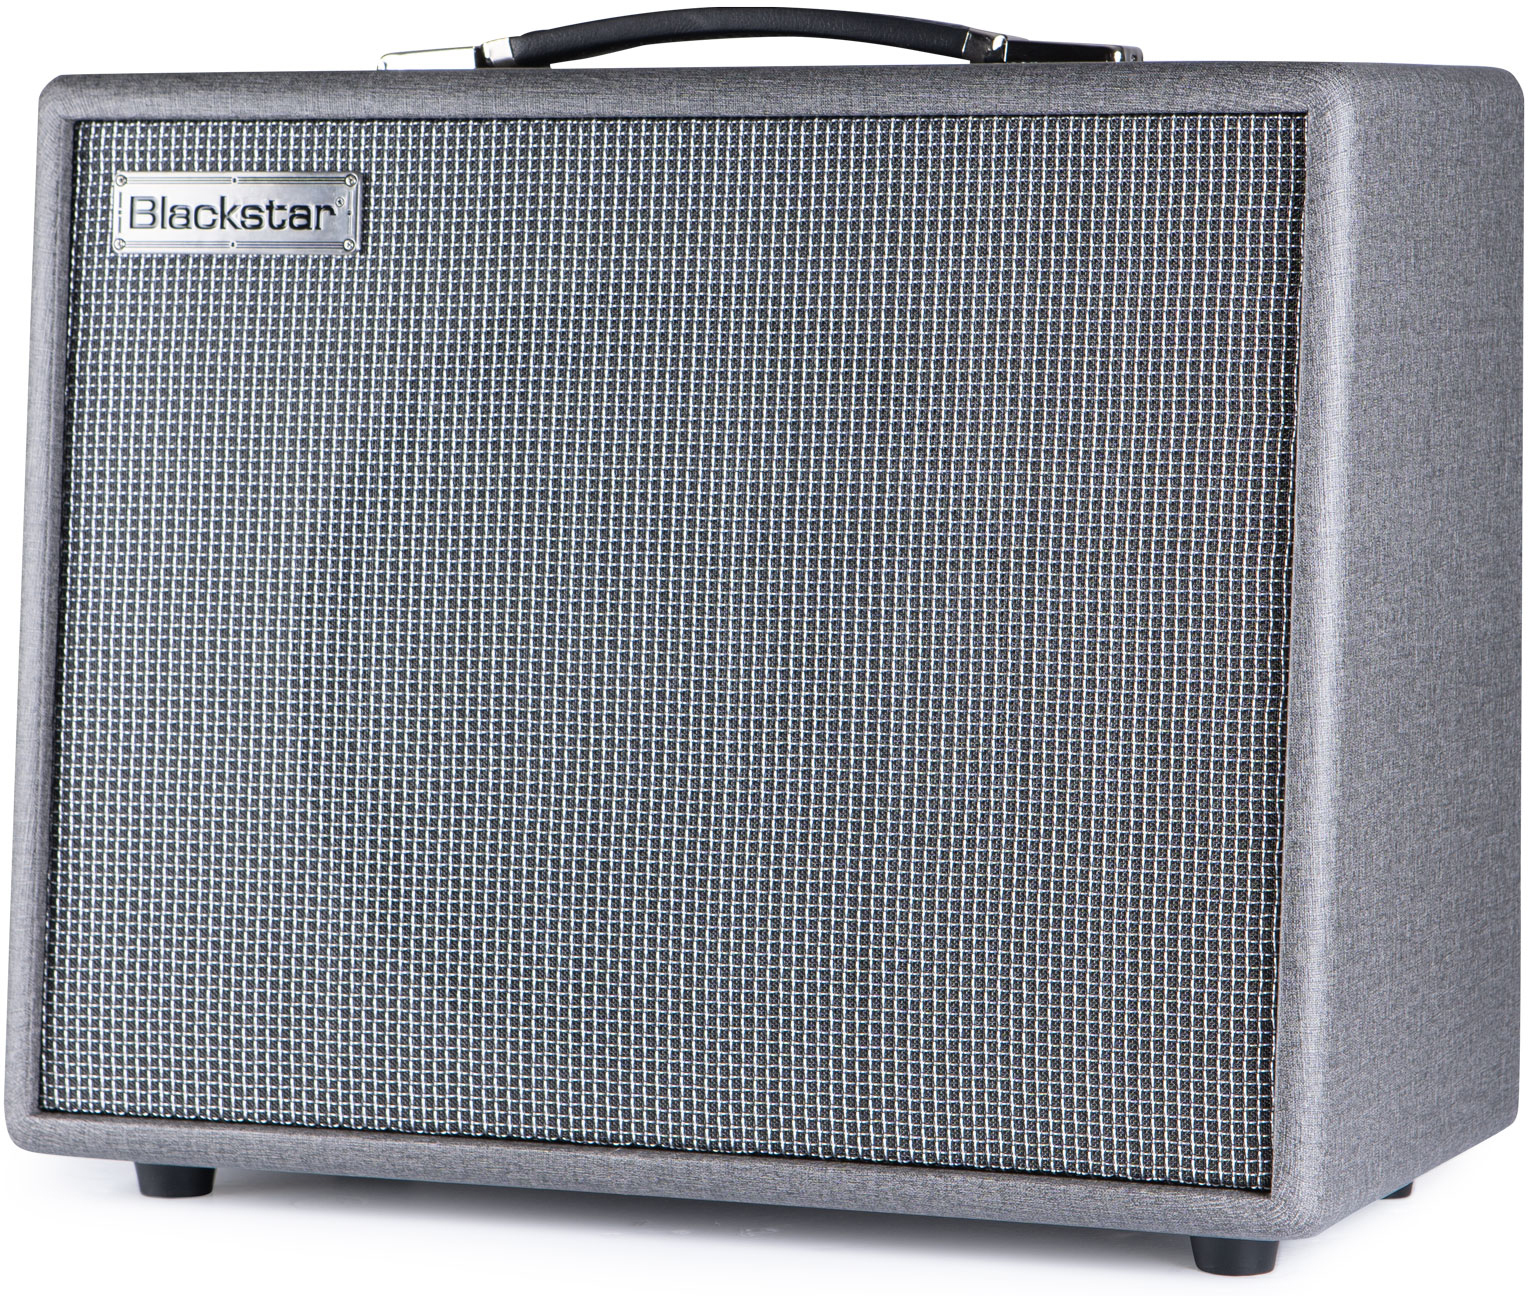 Blackstar Silverline Special 50w 1x12 - Electric guitar combo amp - Main picture